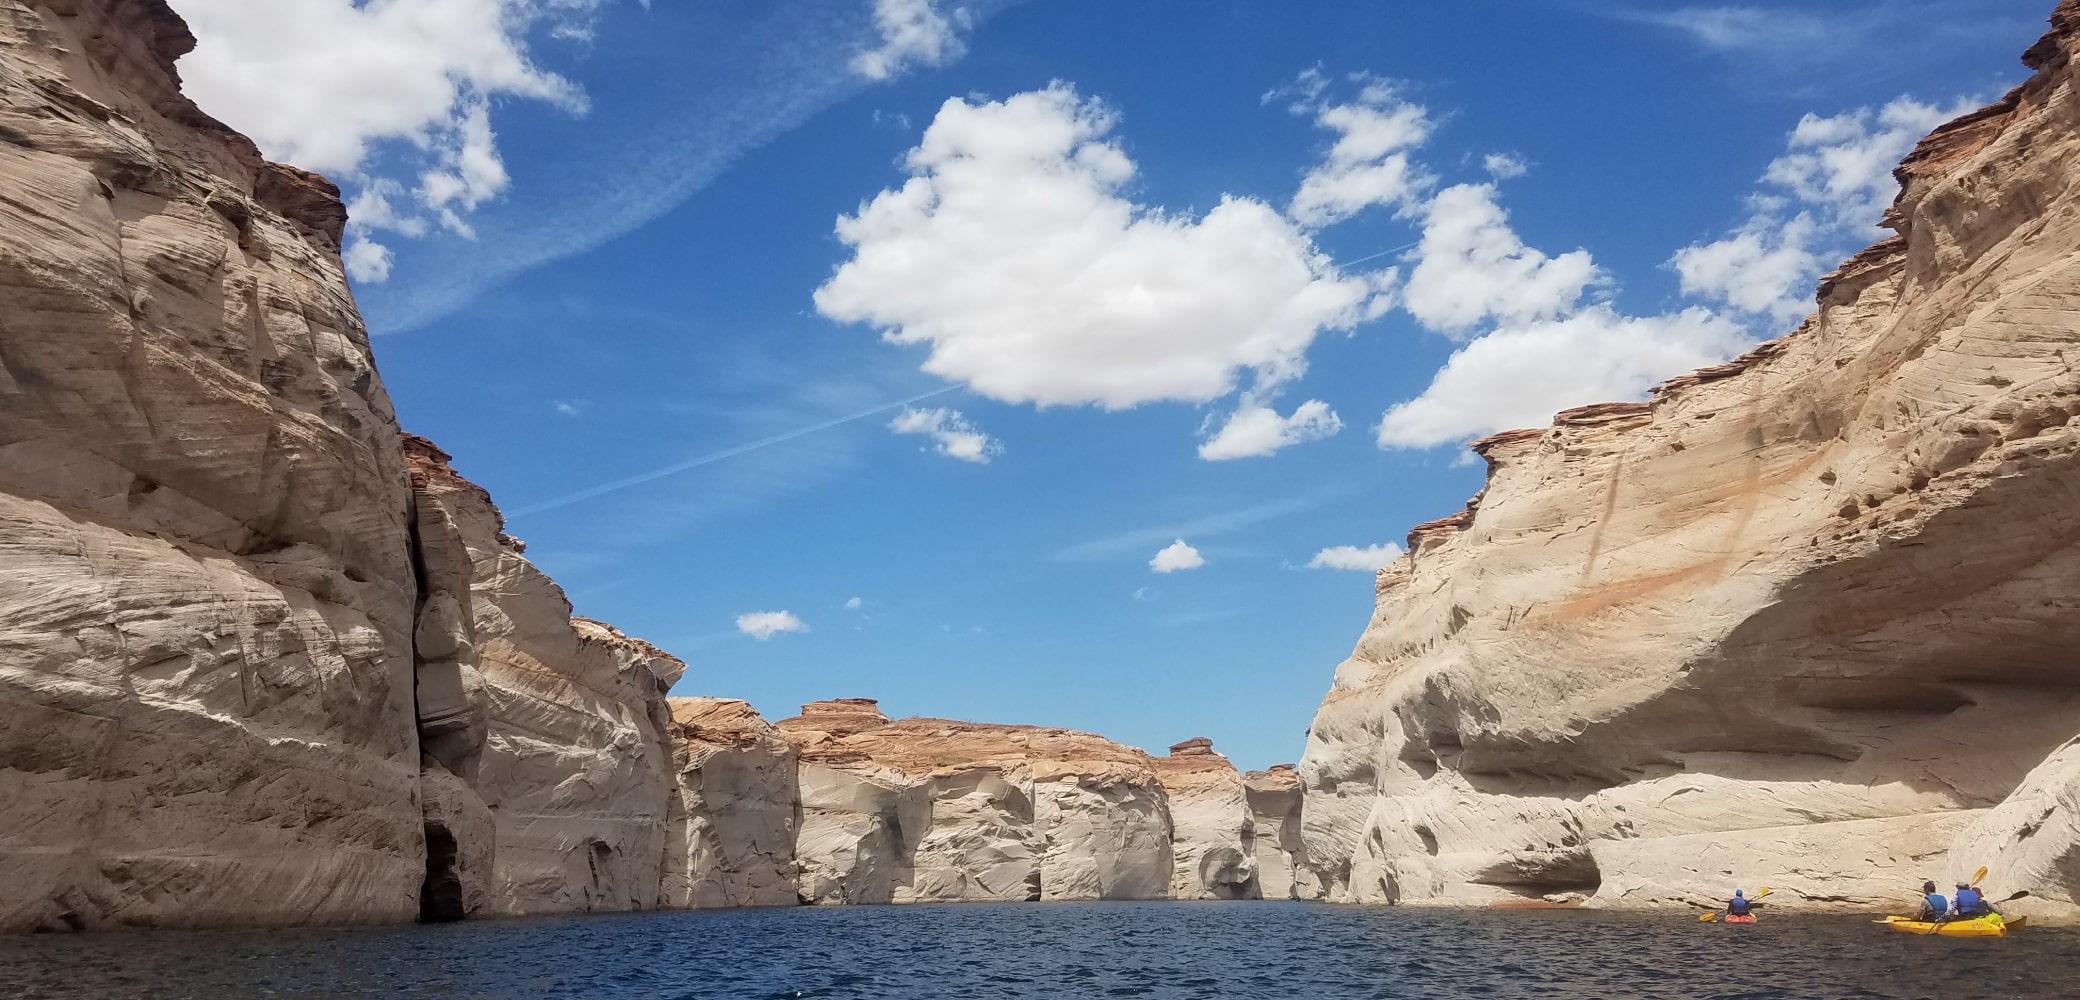 3 kayakers paddling into a canyon on lake powell on a guided tour